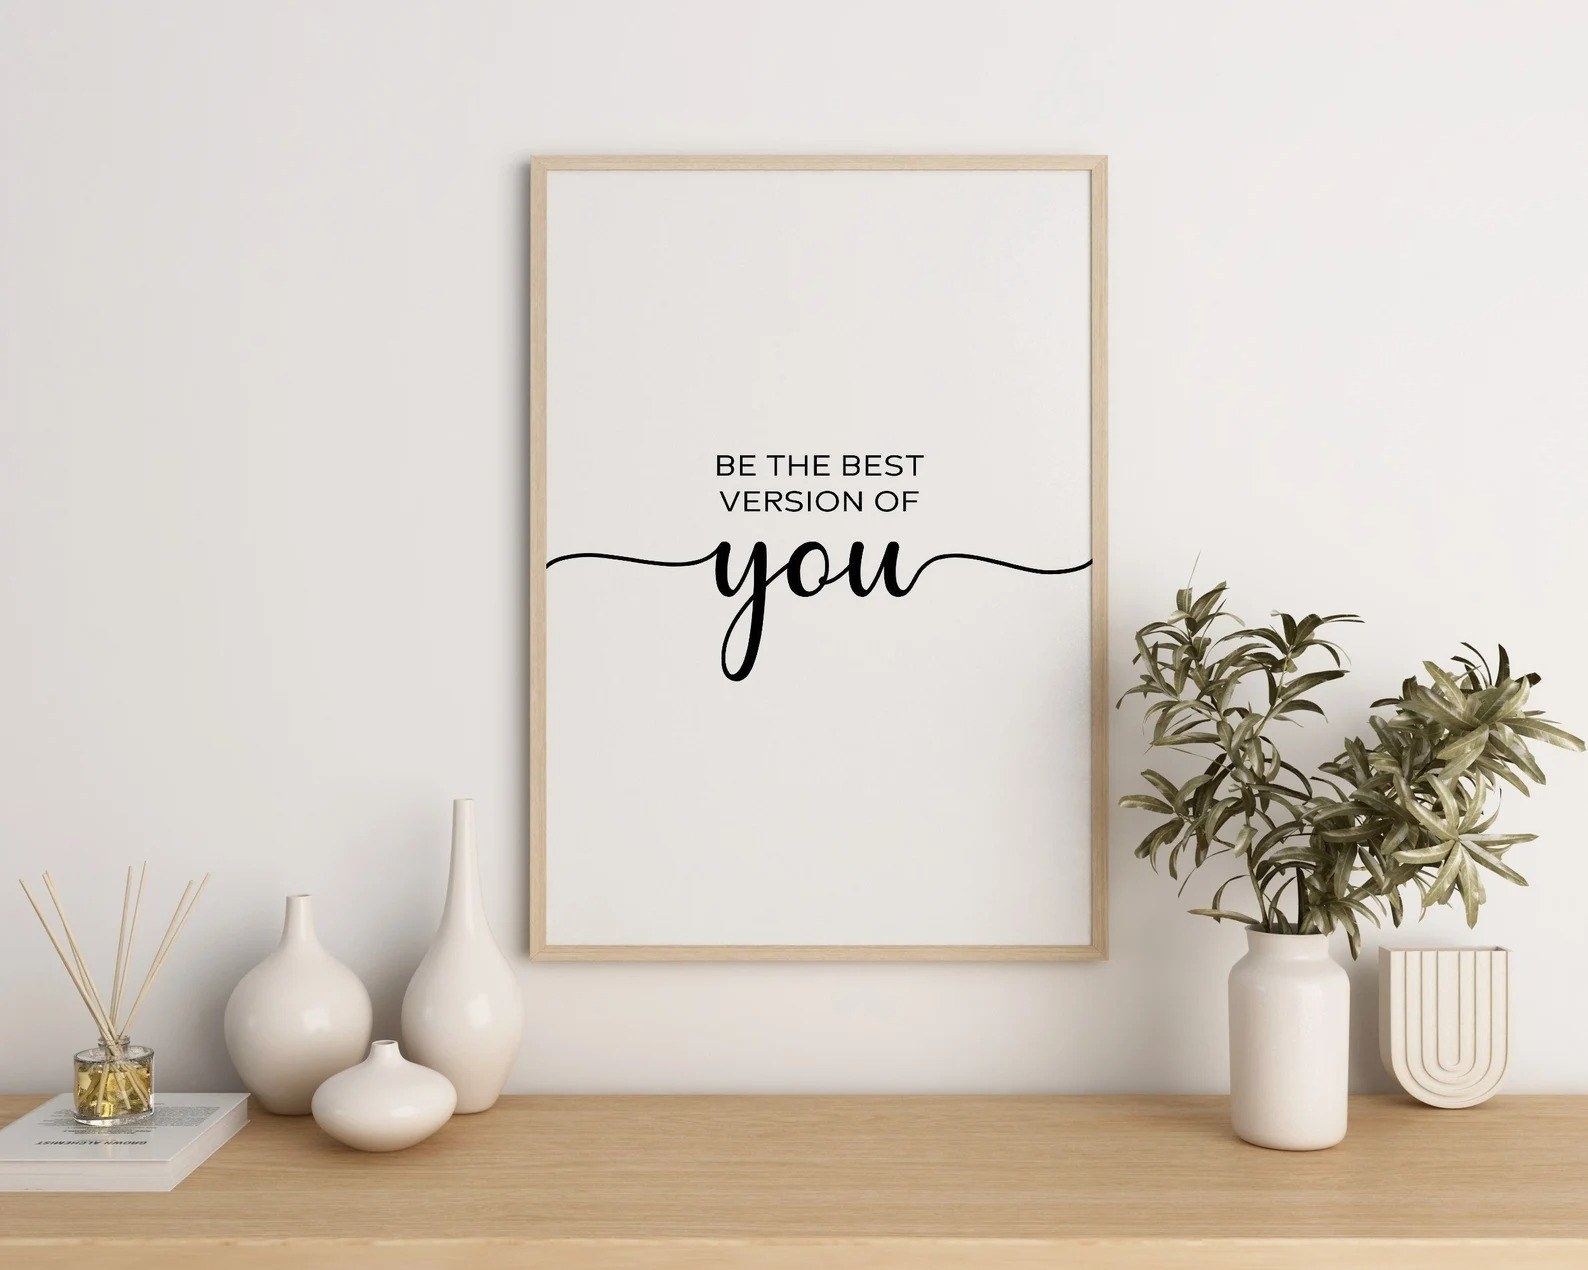 A framed quote on the wall that says &quot;be the best version of you&quot;